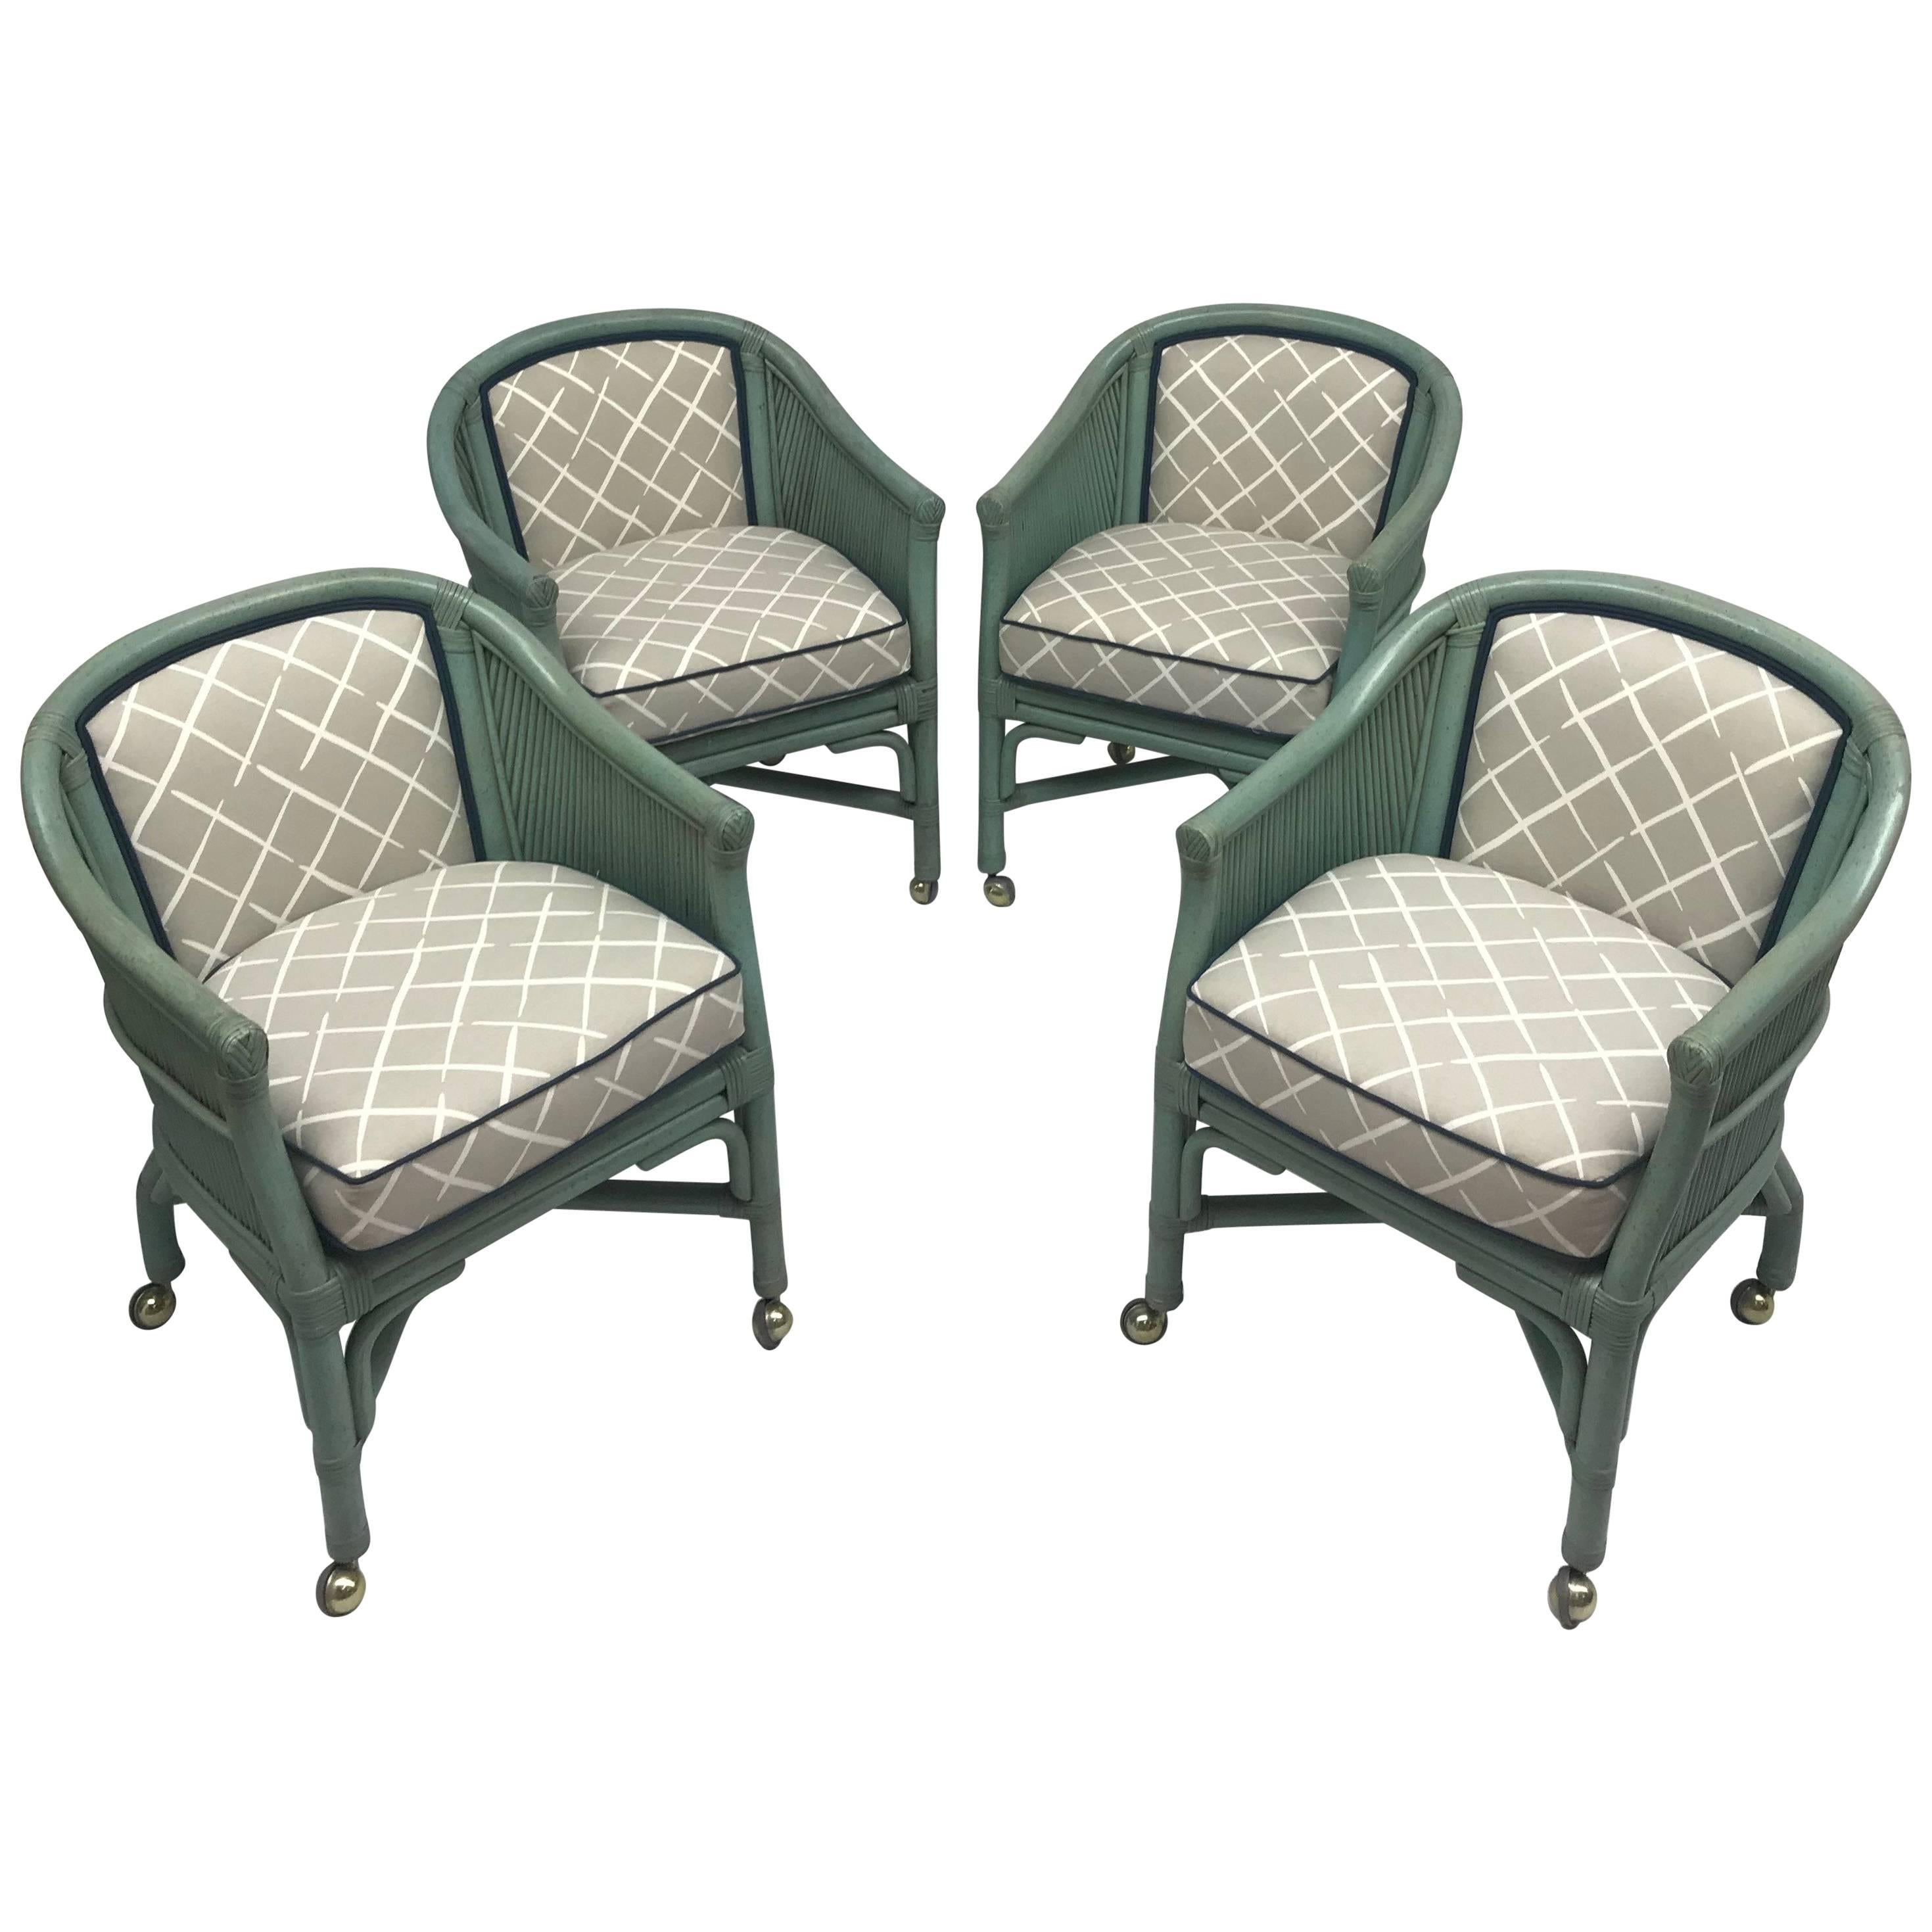 Vintage Seafoam Blue Rattan Chairs With Casters - Set of 4 For Sale